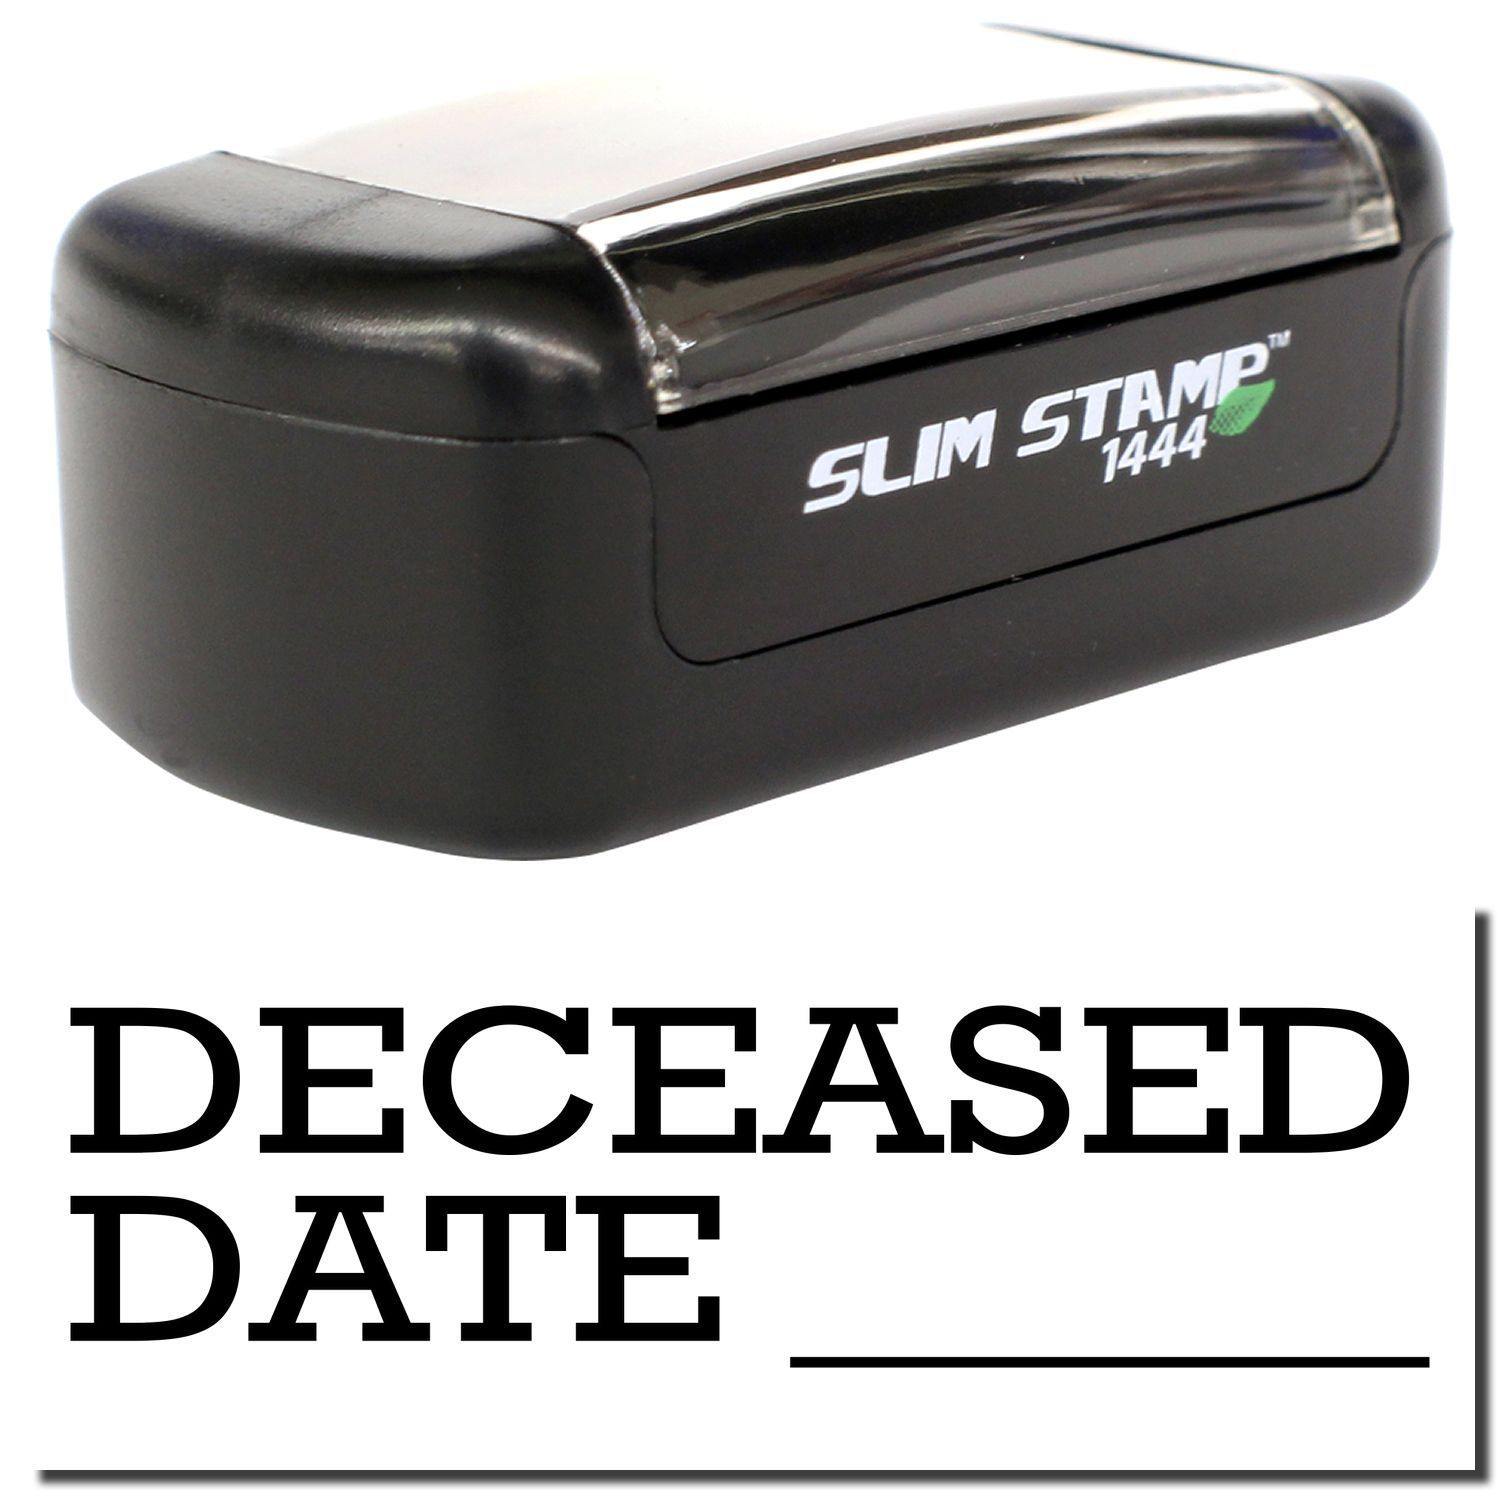 A stock office pre-inked stamp with a stamped image showing how the text "DECEASED DATE" with a line is displayed after stamping.